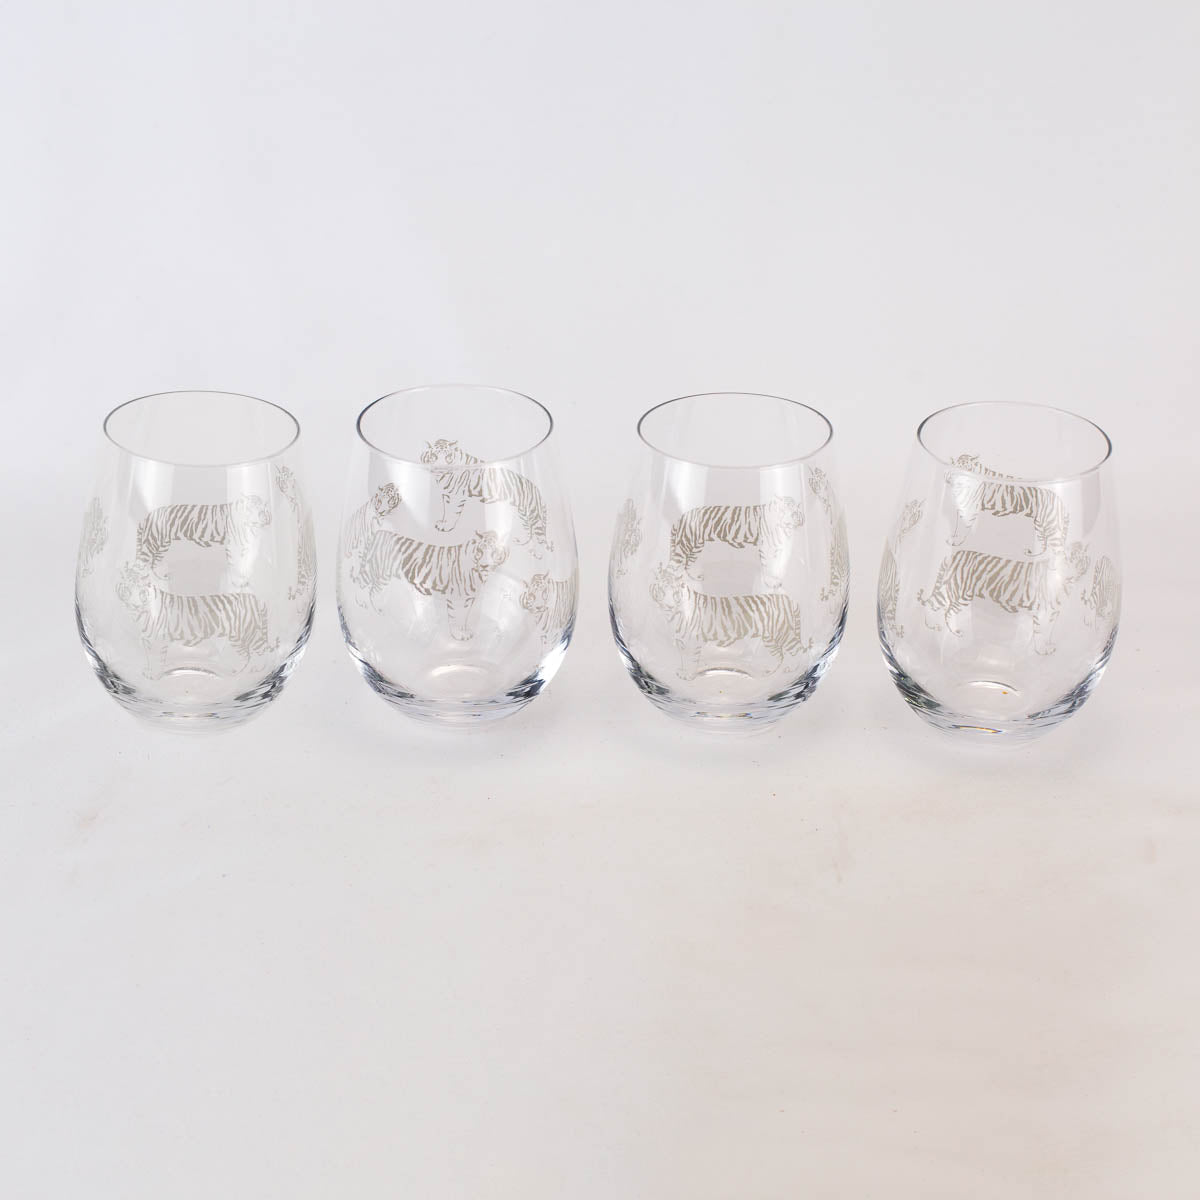 TRS On the Prowl Wine Glass Gift Set